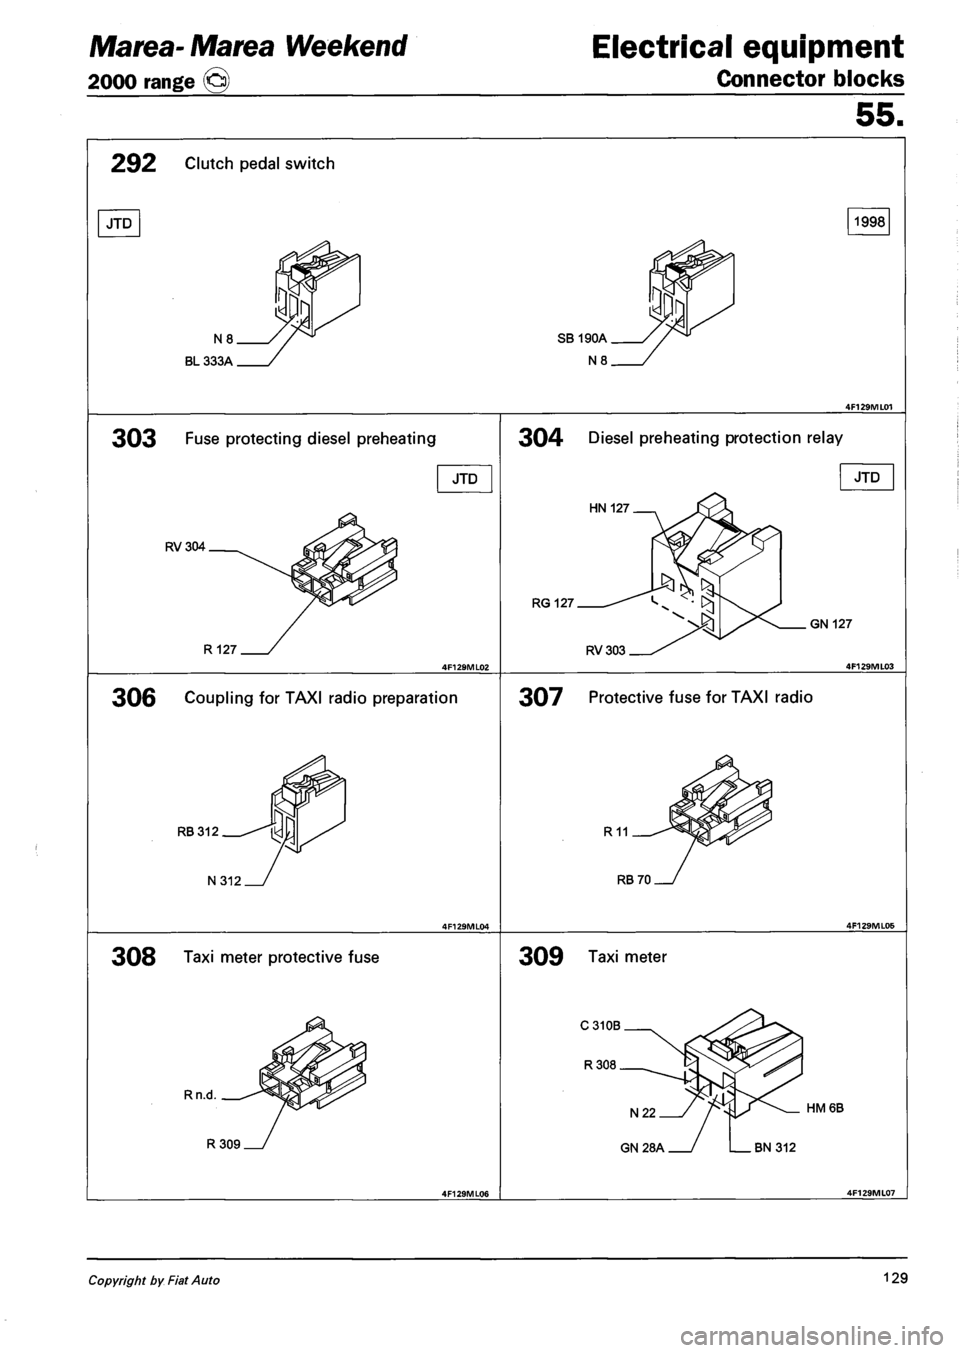 FIAT MAREA 2000 1.G Service Manual Marea- Marea Weekend 
2000 range © 
Electrical equipment 
Connector blocks 
55. 
292 Clutch pedal switch 
JTD 1998 
303 Fuse protecting diesel preheating 
JTD 
RV304 
R127 
304 Diesel preheating prot